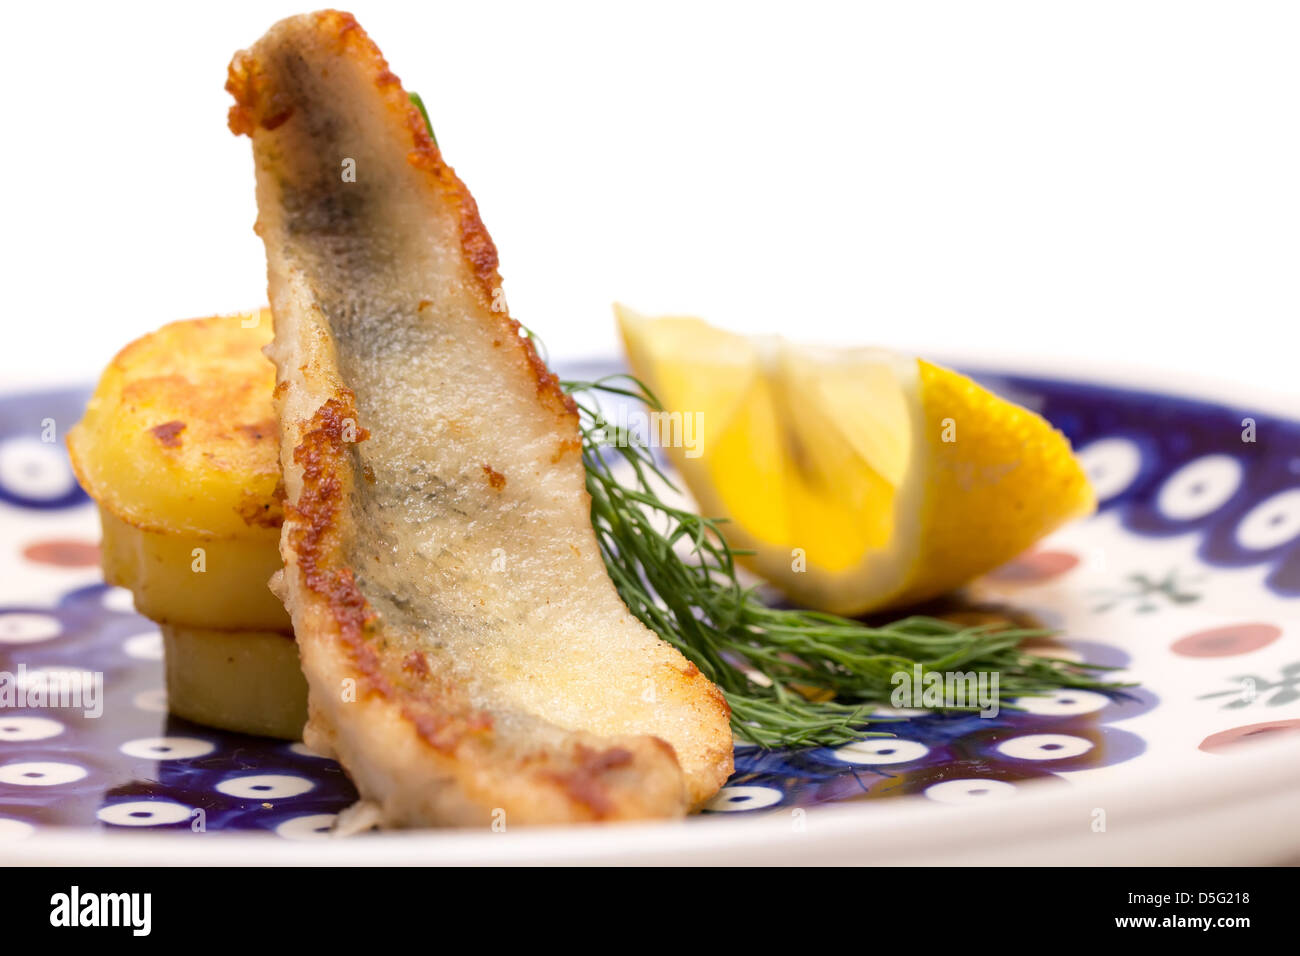 Perch filet with fried potatoes, lemon and dill in a blue plate Stock Photo